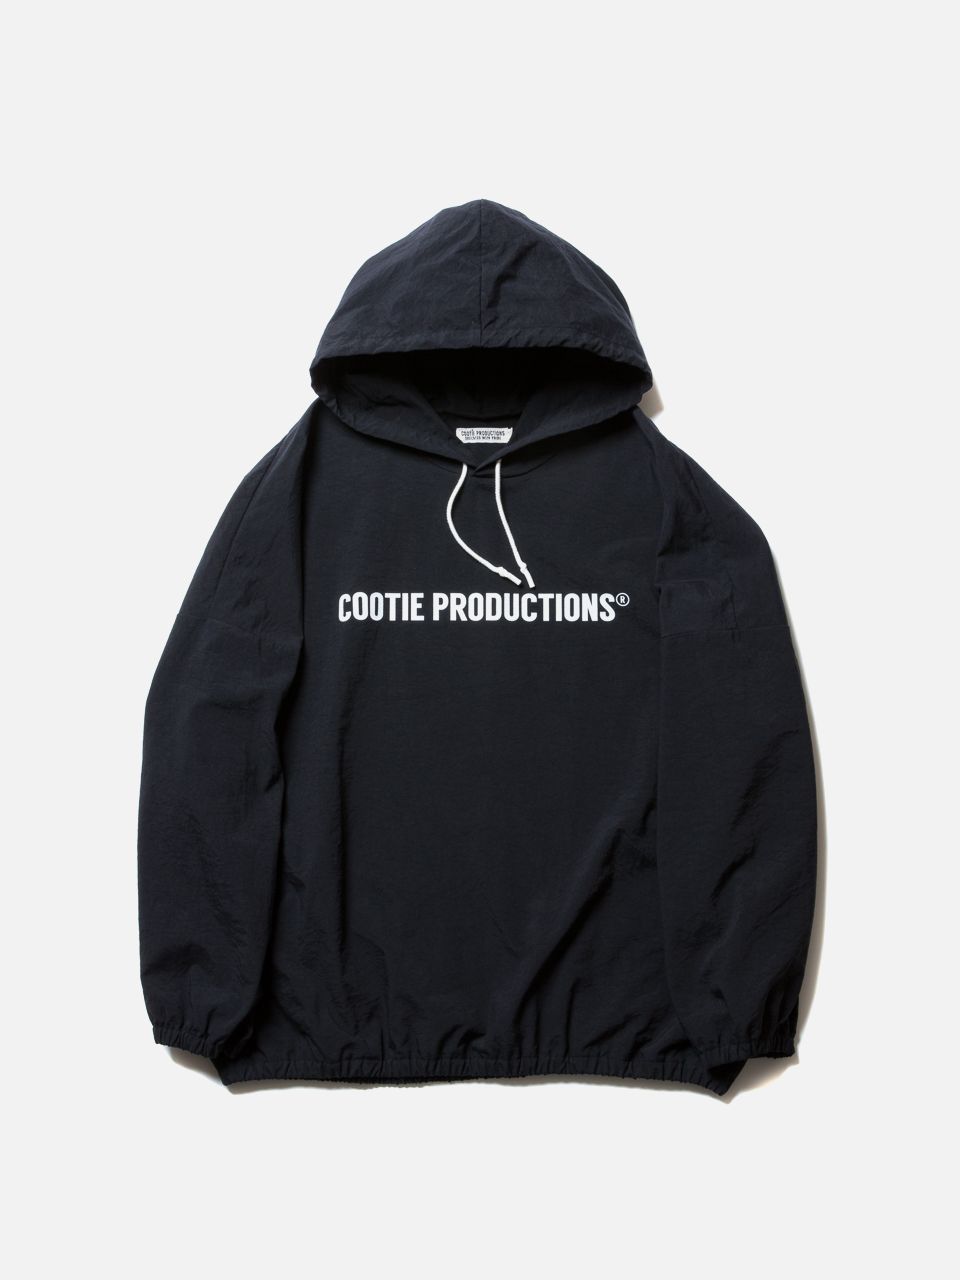 COOTIE nylon Pullover Parka ナイロン パーカー www.krzysztofbialy.com